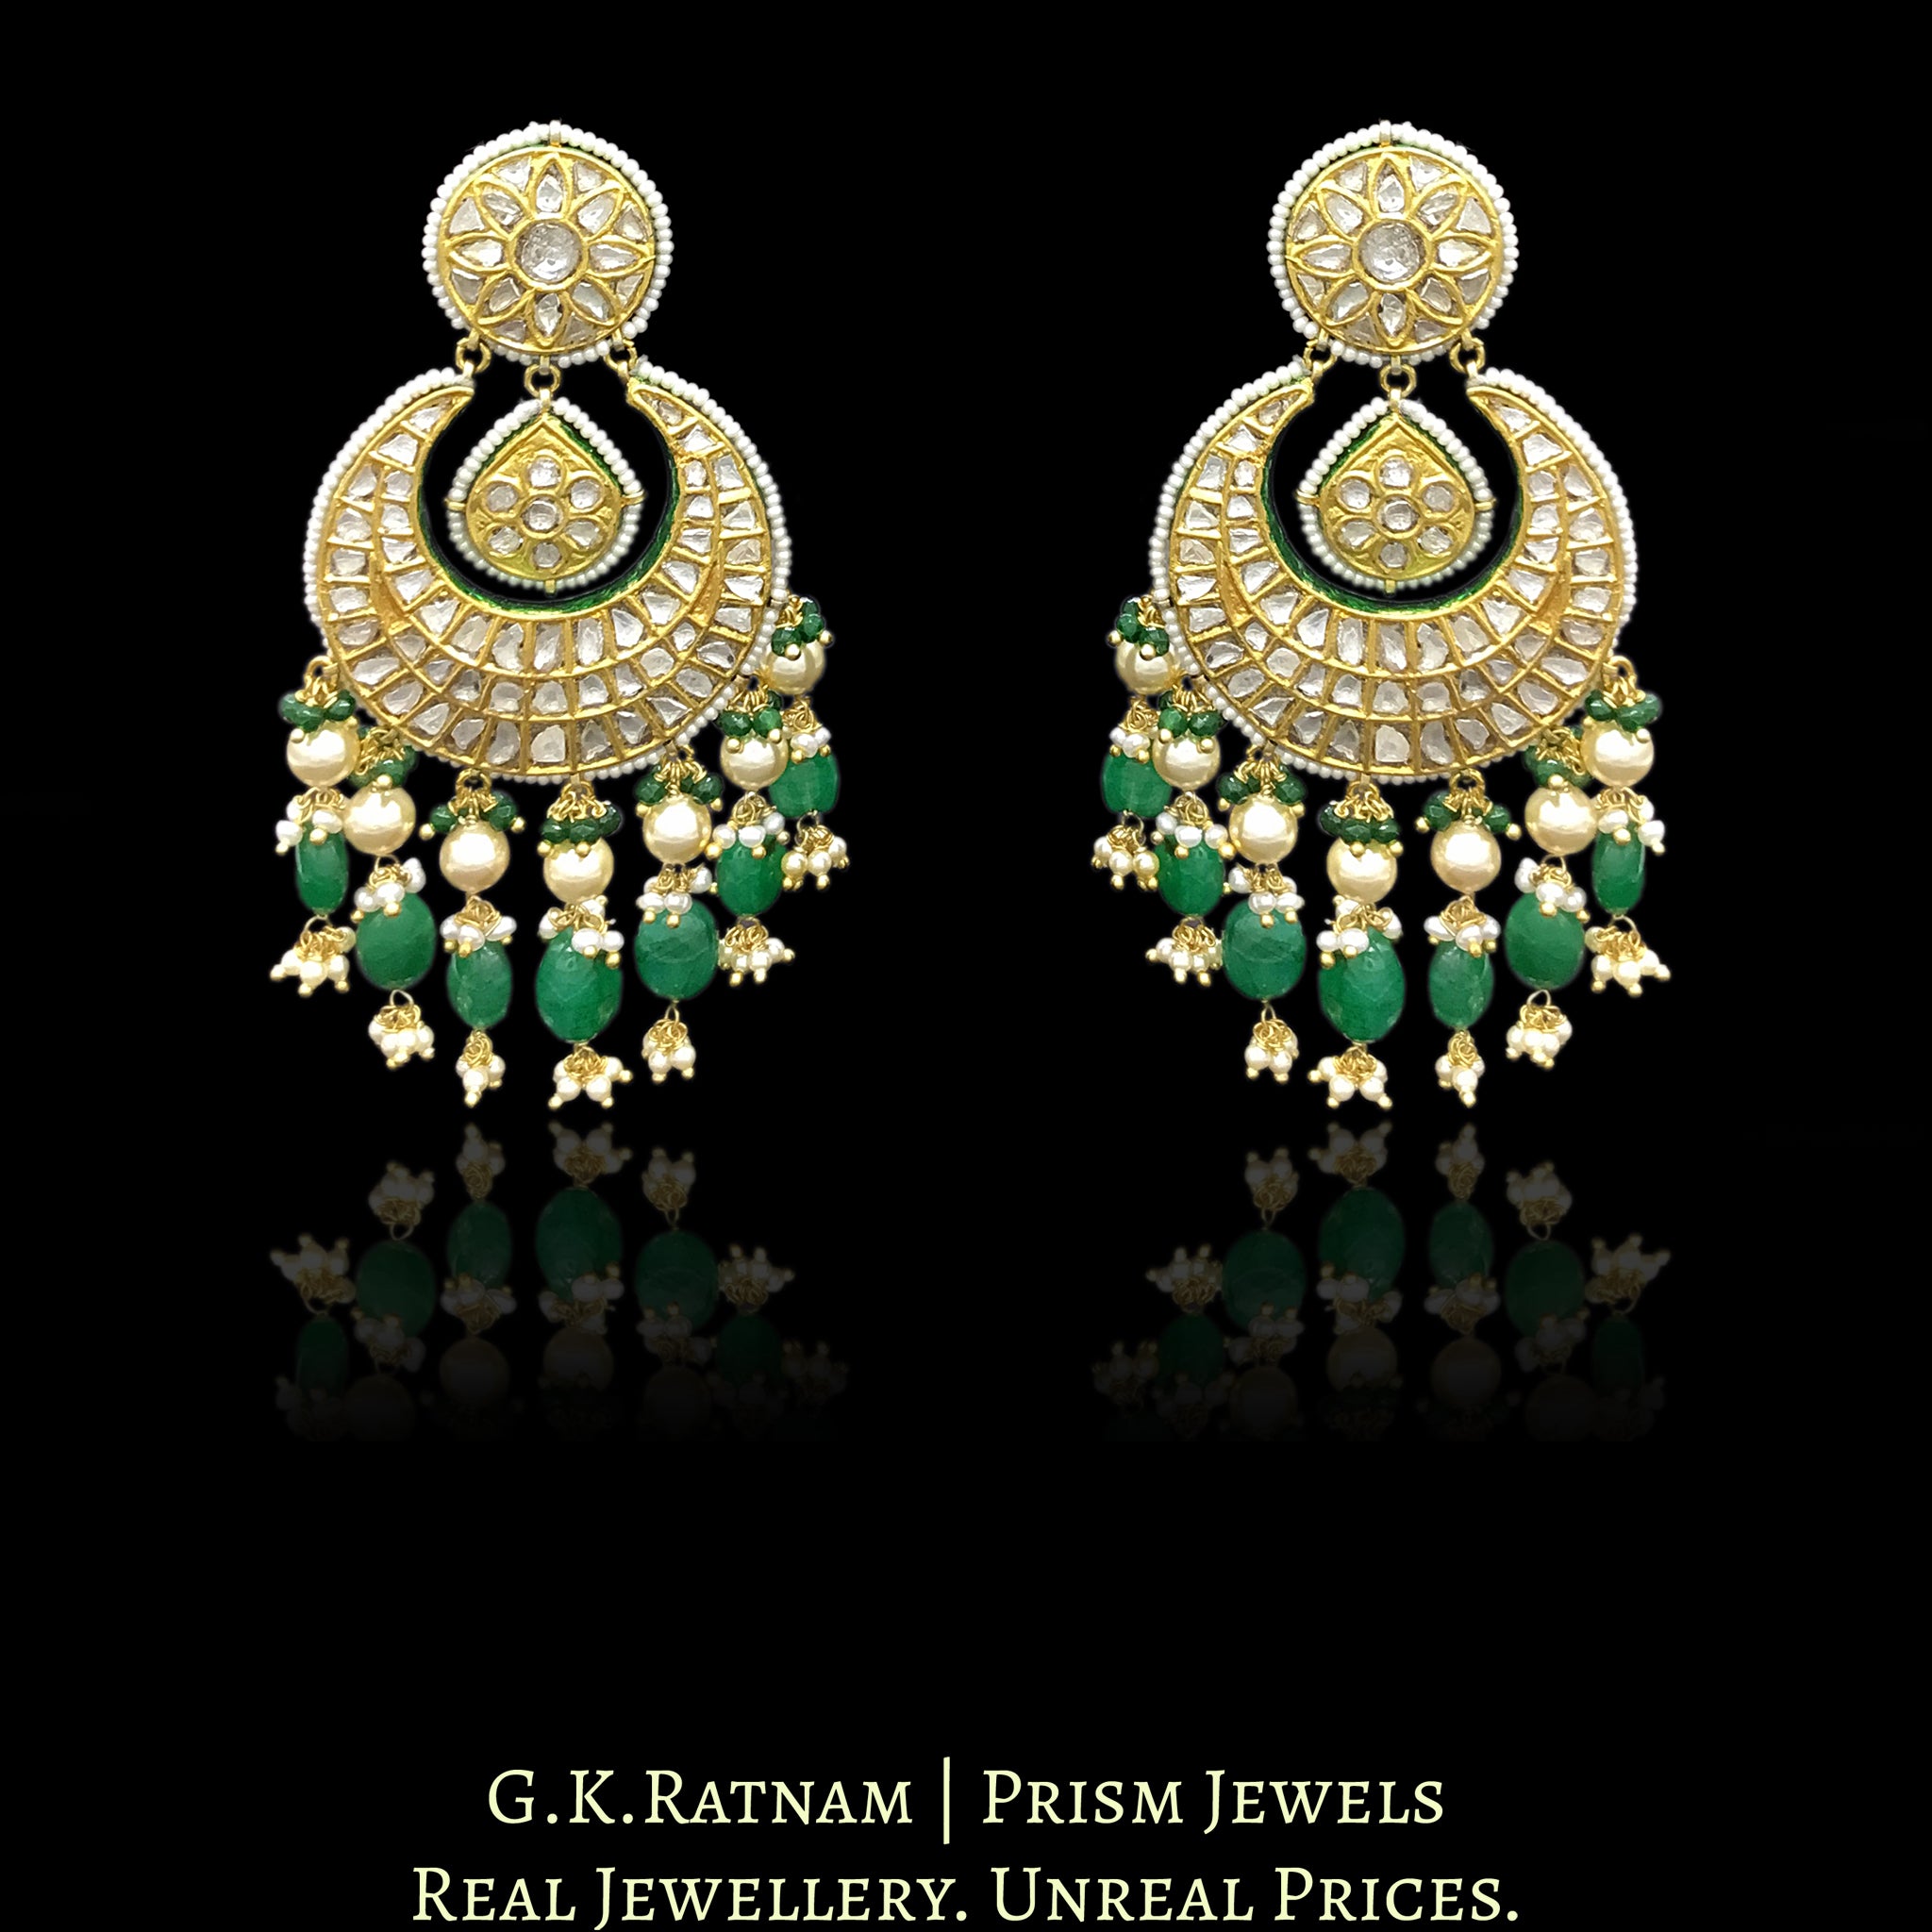 23k Gold and Diamond Polki Chand Bali Earring Pair with chandelier-like stringing of pearls and emerald-grade beryls - G. K. Ratnam